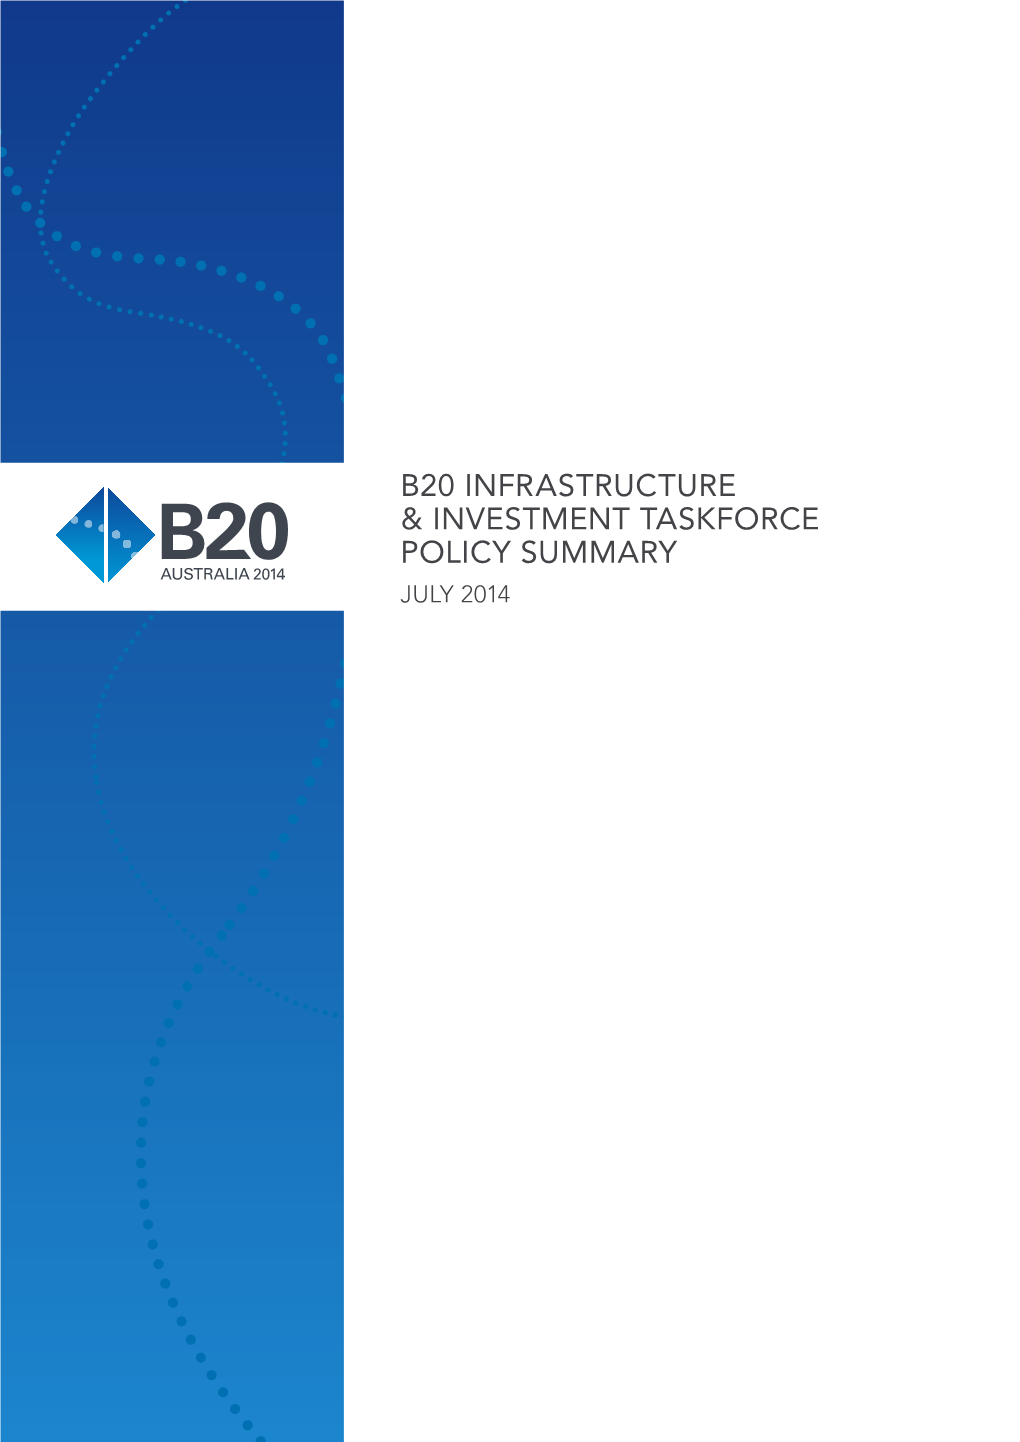 B20 Infrastructure & Investment Taskforce Policy Summary